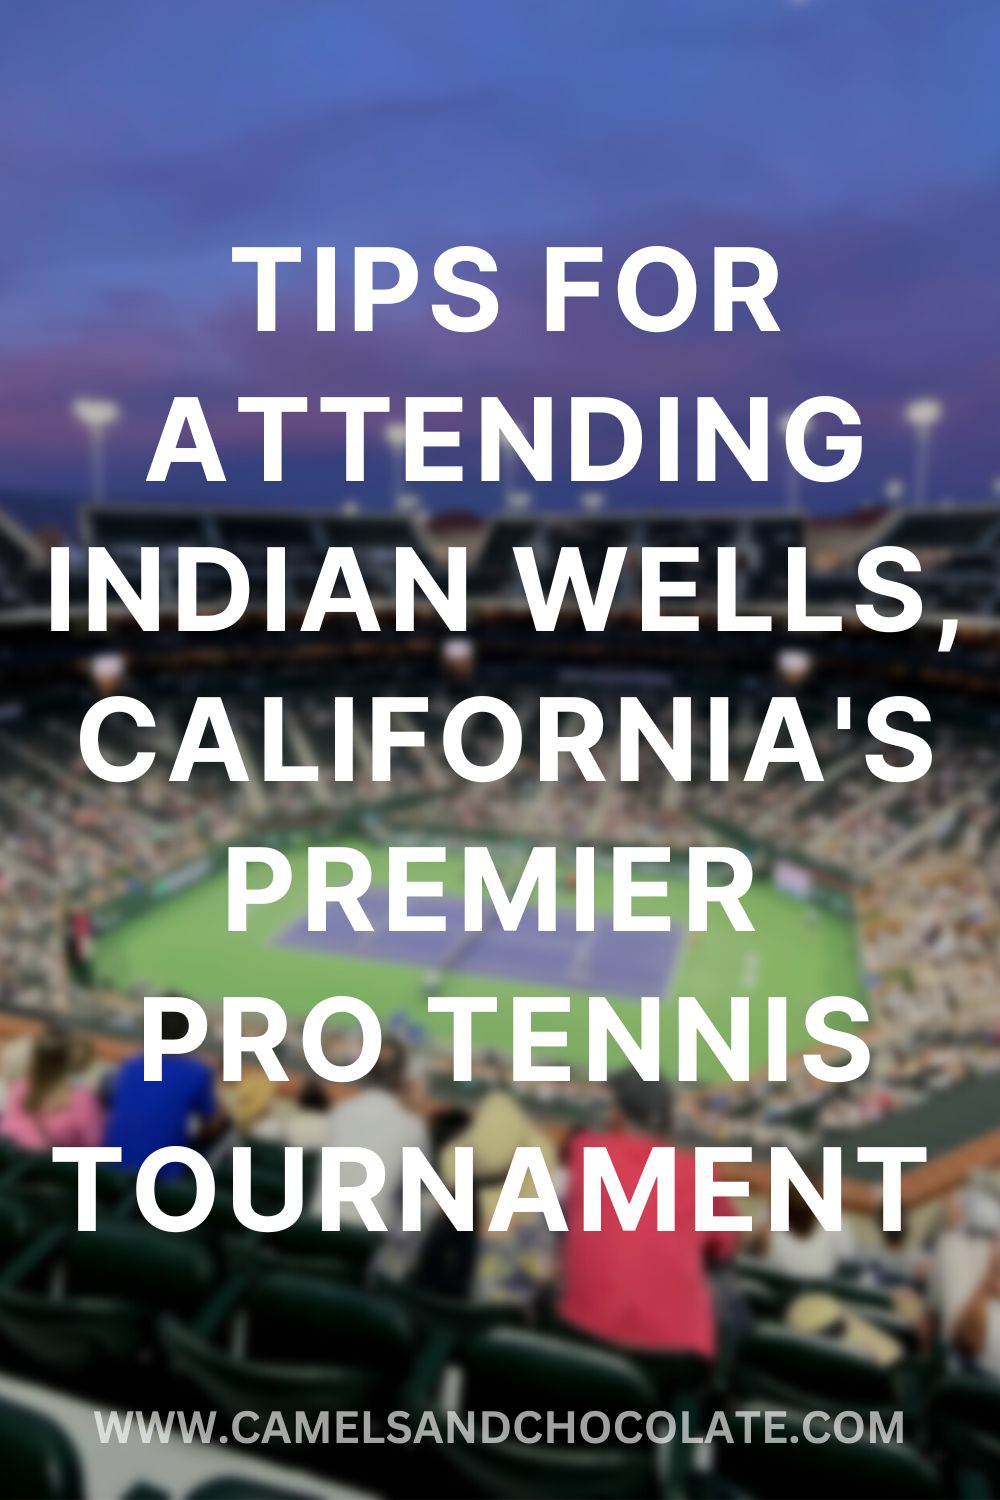 How to Plan a Trip to Indian Wells Tennis Tournament